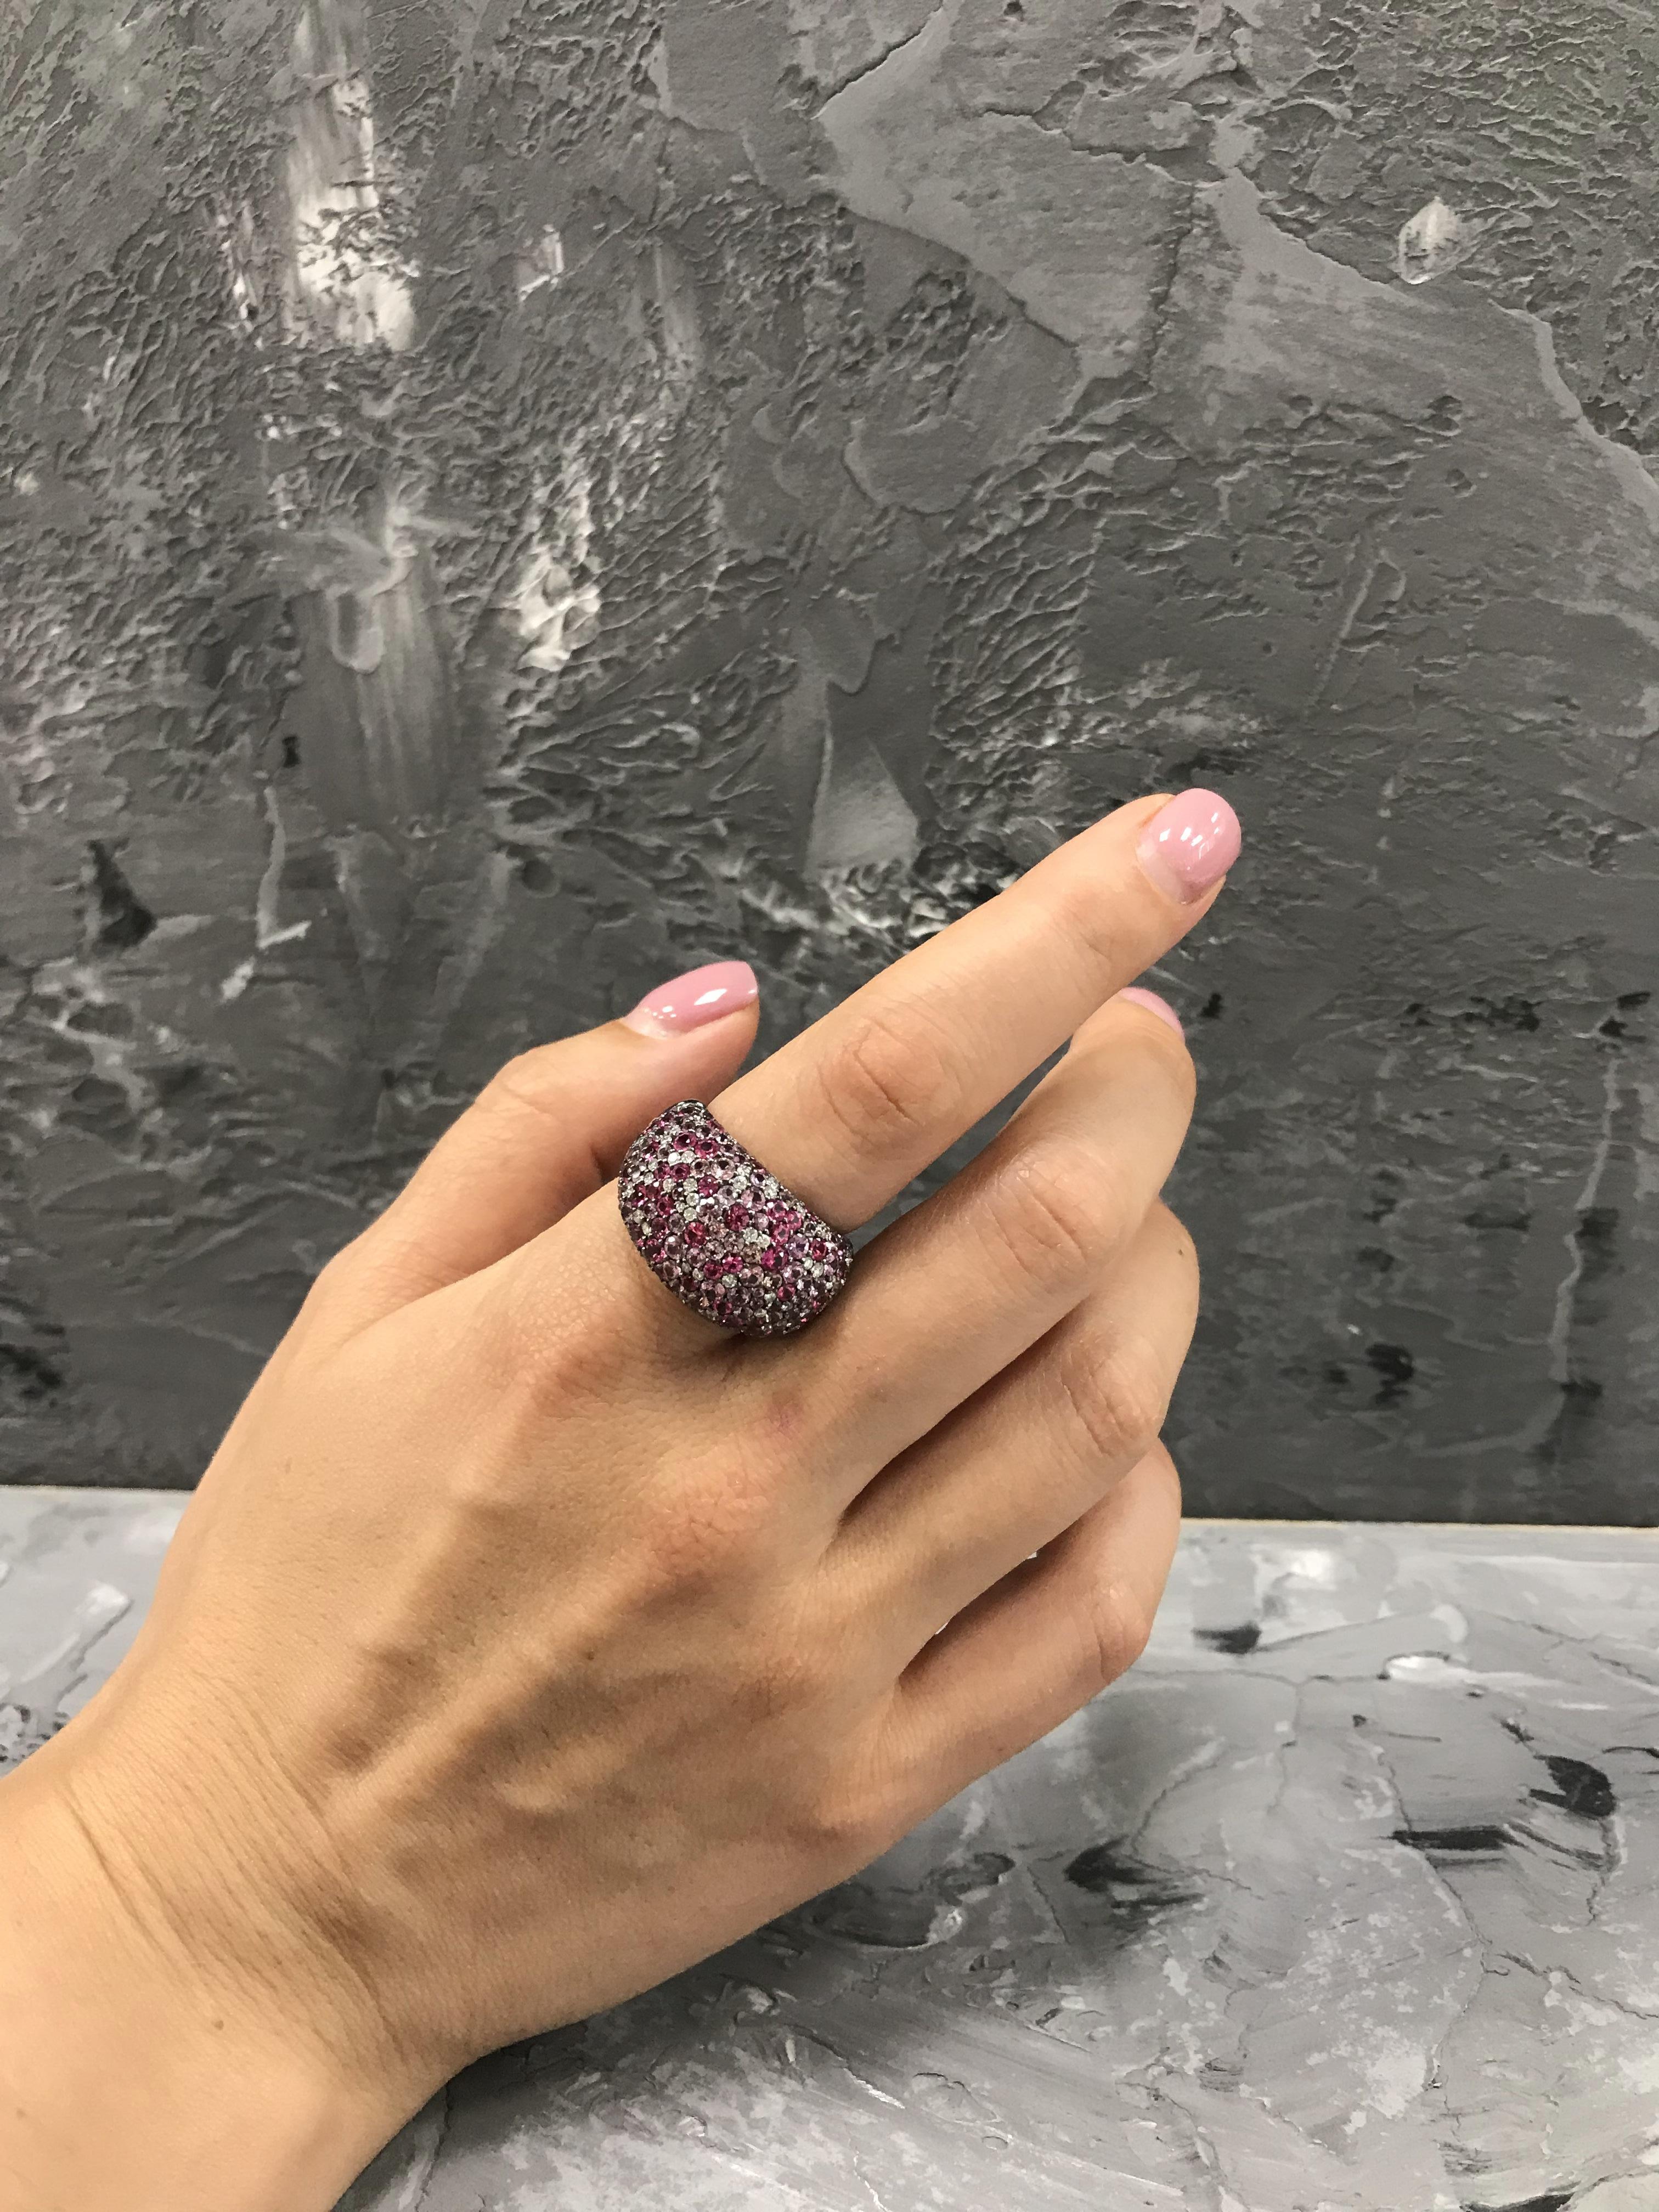 The gentle pink tones of these pink sapphires are inspired by the delicate flourishing nature and flowers decorating the Mediterranean panorama. So gentle, fresh and delicate.
This ring will refresh you and make you feel like you just came back from